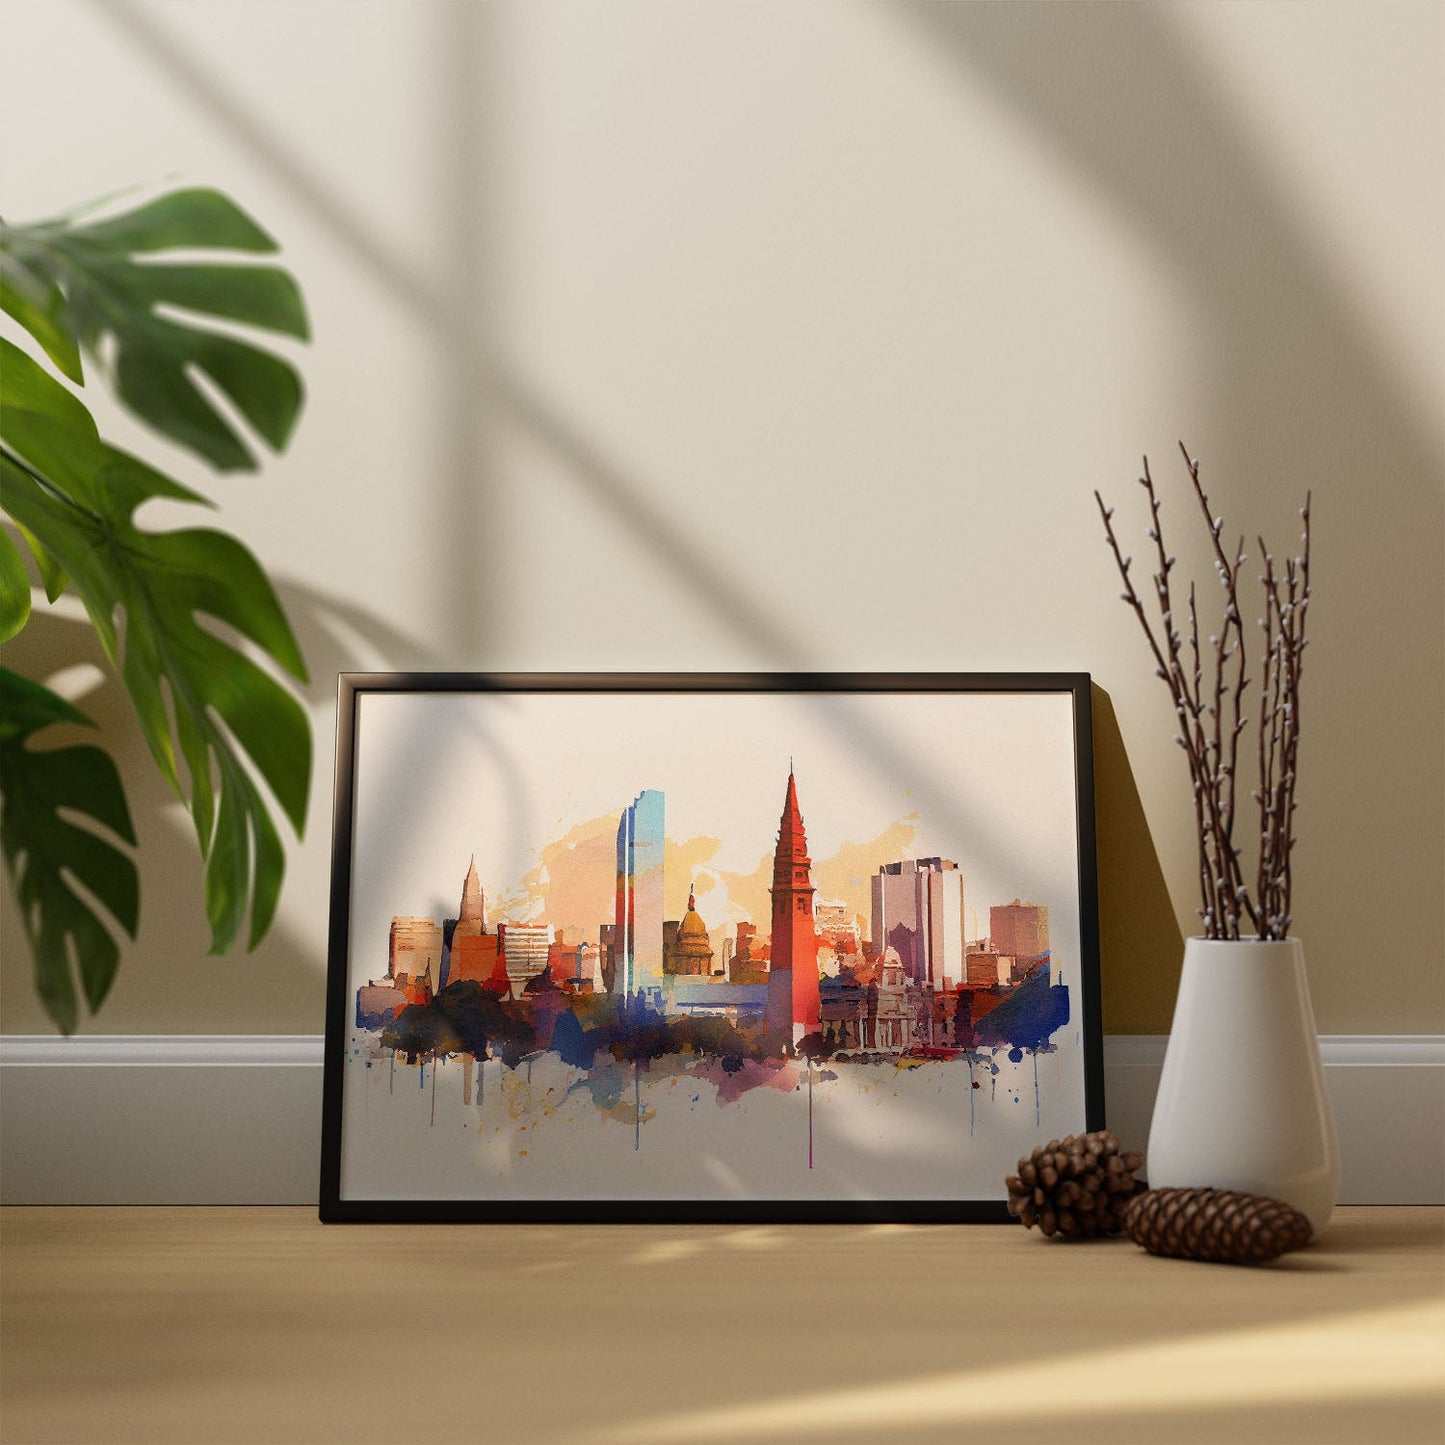 Nacnic watercolor of a skyline of the city of Buenos Aires_4. Aesthetic Wall Art Prints for Bedroom or Living Room Design.-Artwork-Nacnic-A4-Sin Marco-Nacnic Estudio SL